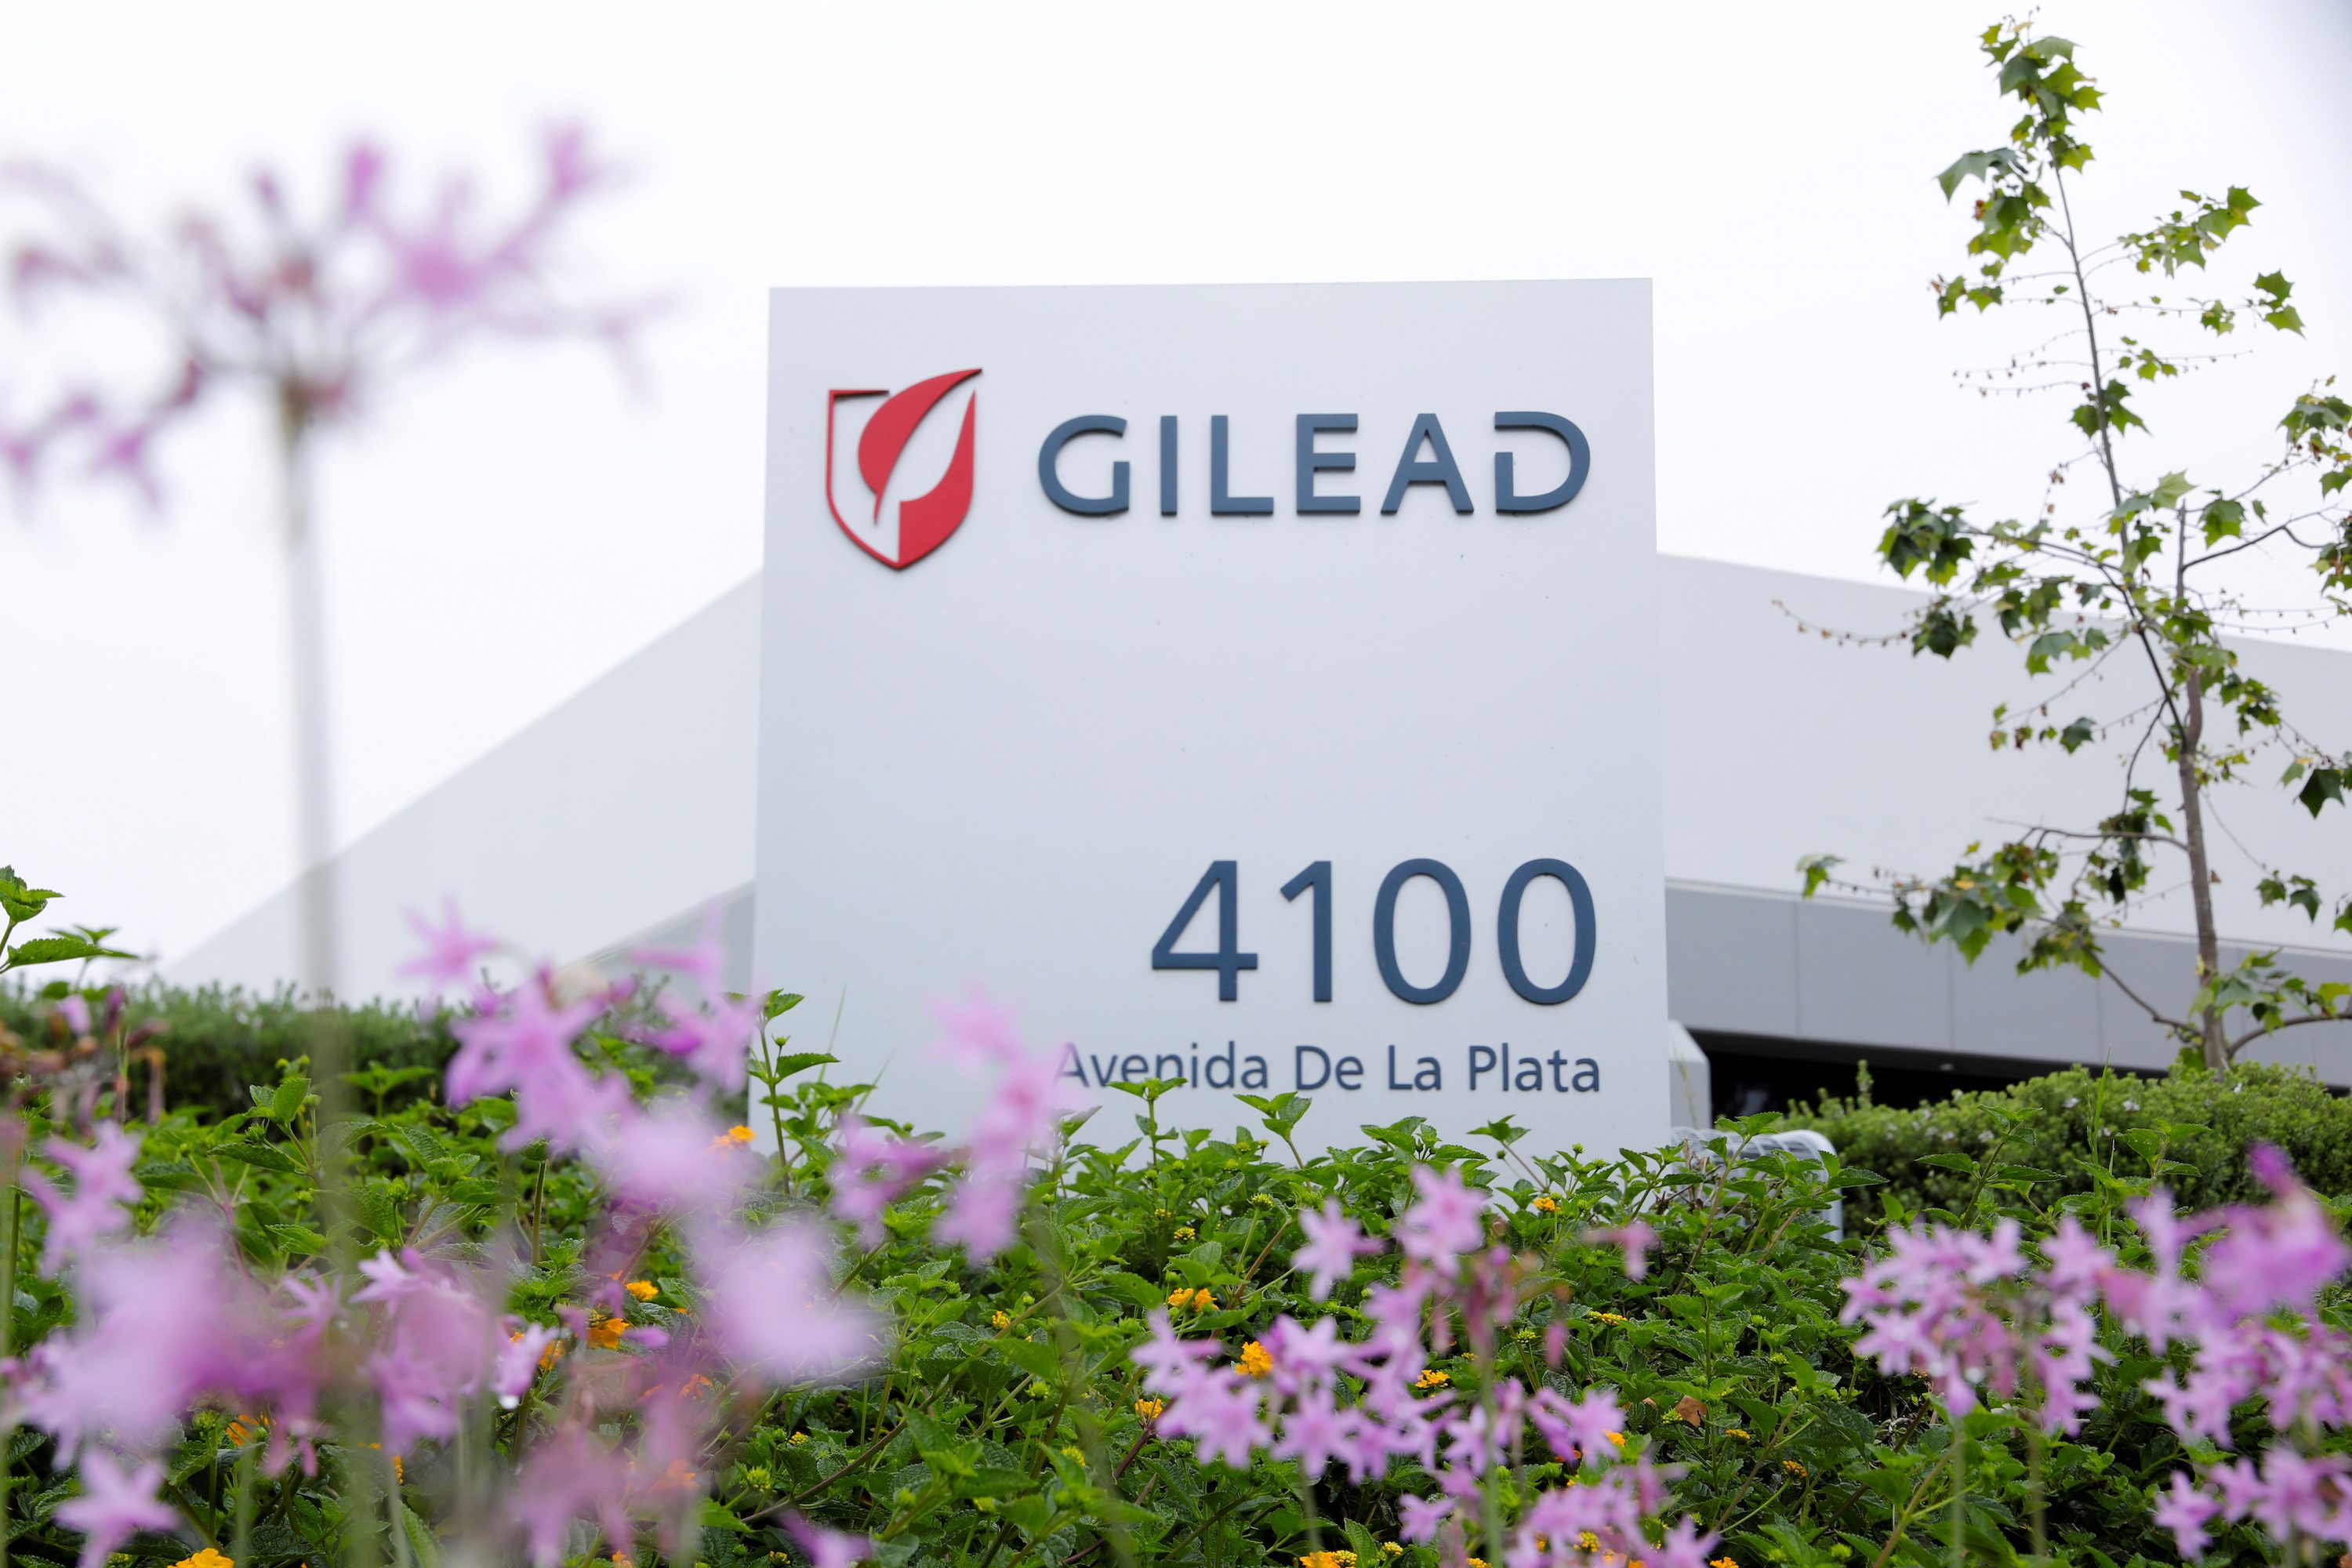 Gilead’s COVID-19 drug helps boost Q2 2021 results as HIV sales dip